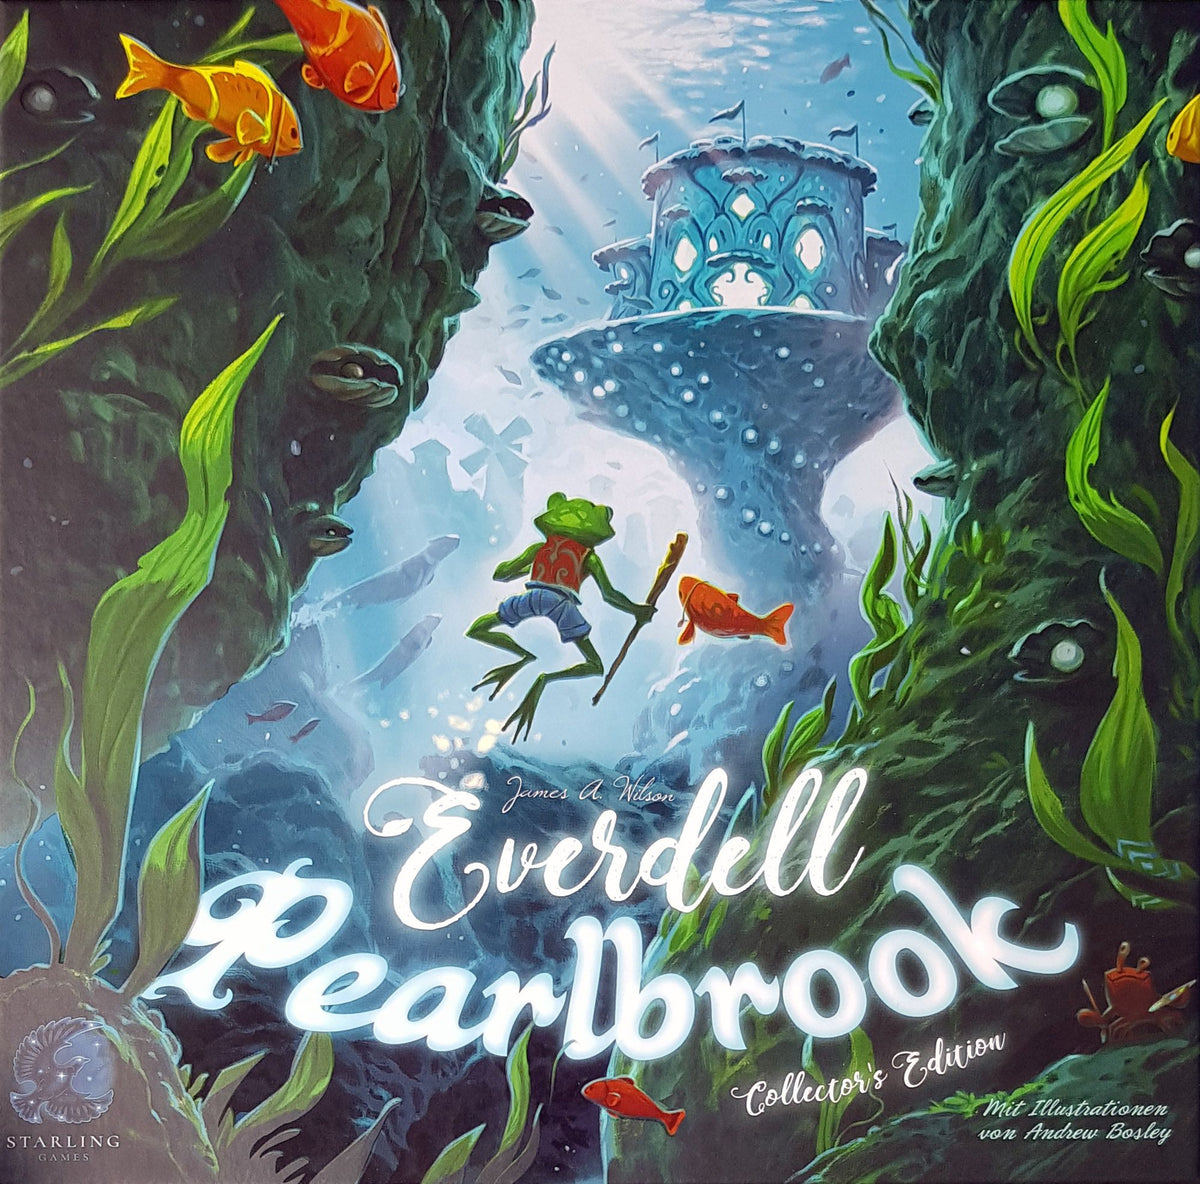 Everdell - Pearlbrook Expansion (Collectors Edition)